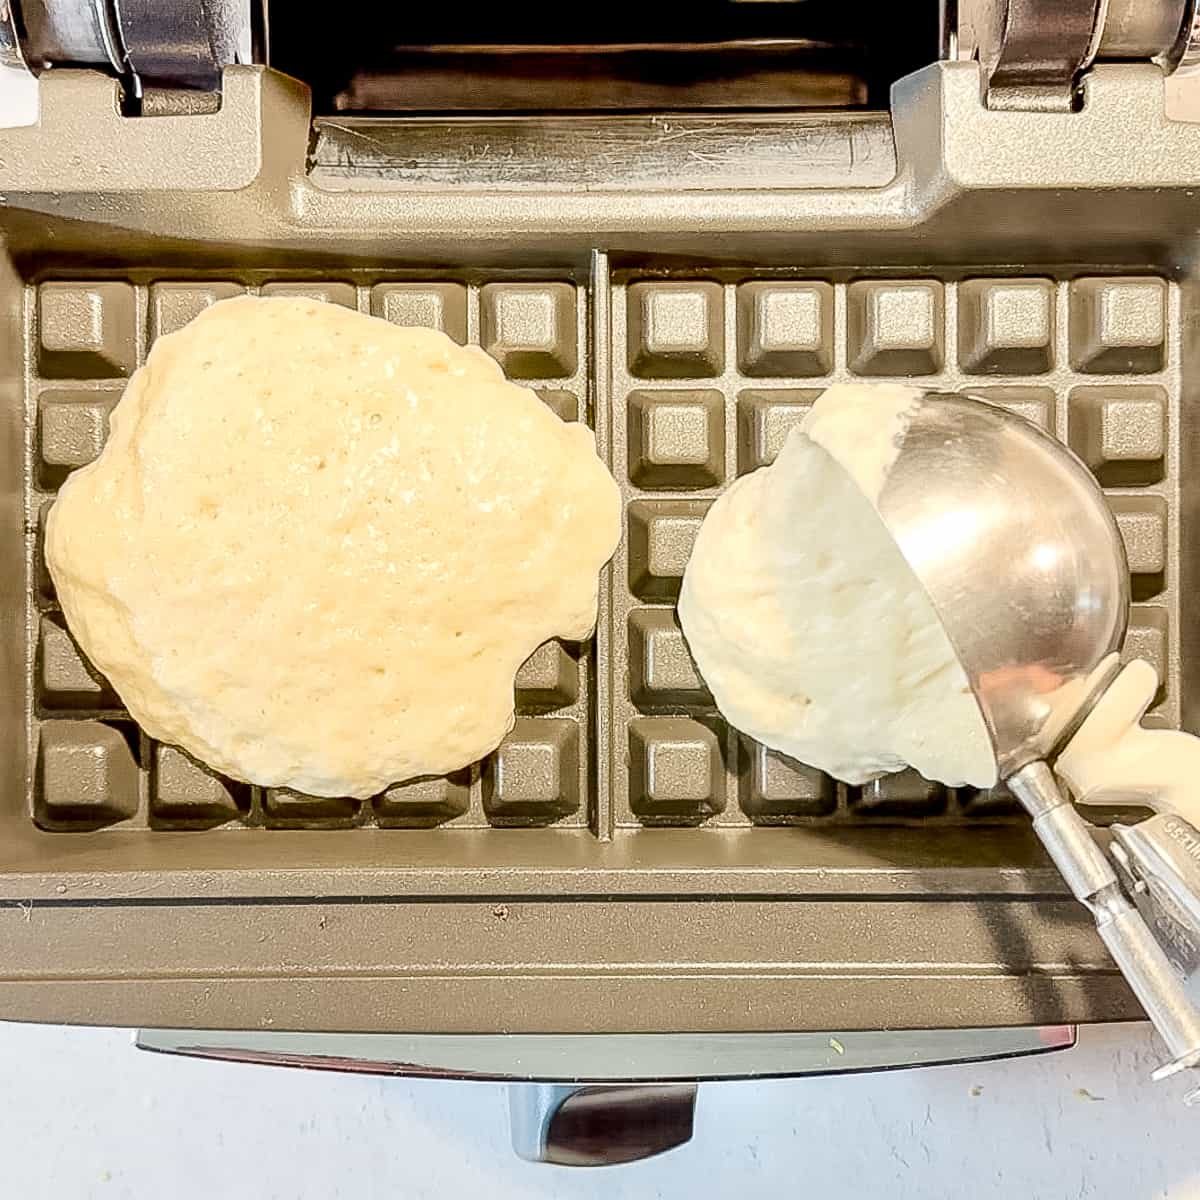 adding a scoop of waffle batter to waffle maker.